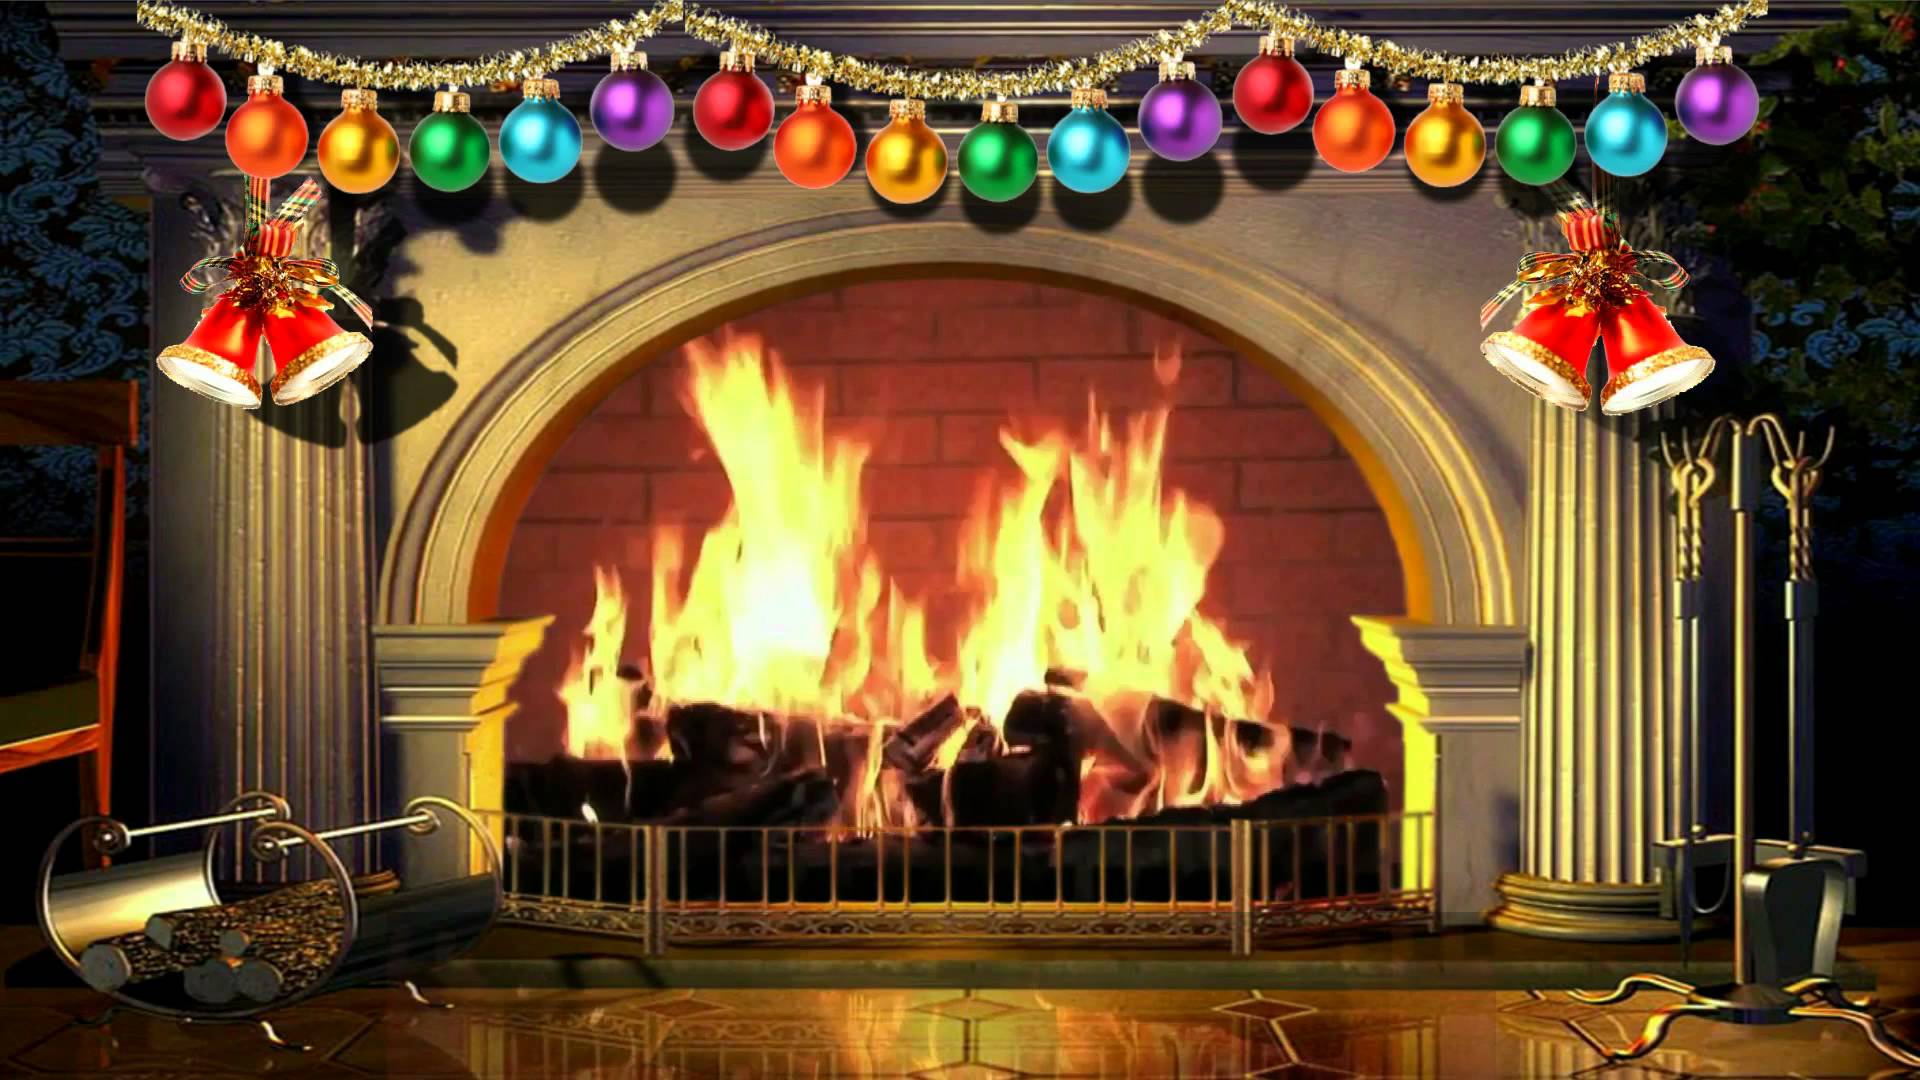  download Virtual Christmas Fireplace background video 1080p 1920x1080